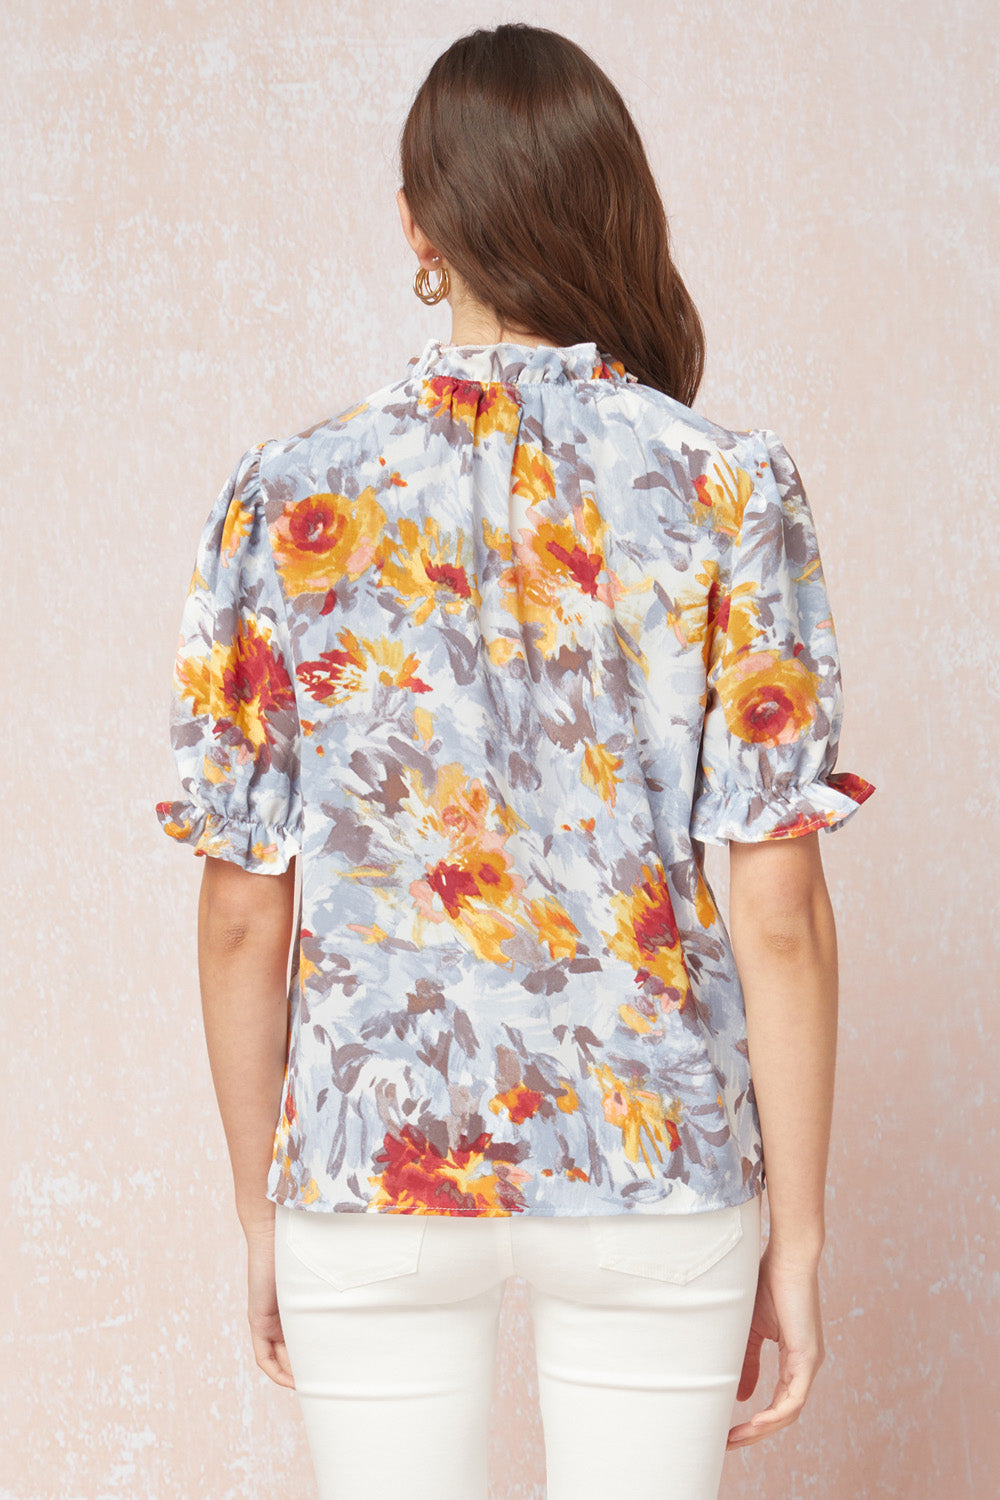 Tilly - bright floral